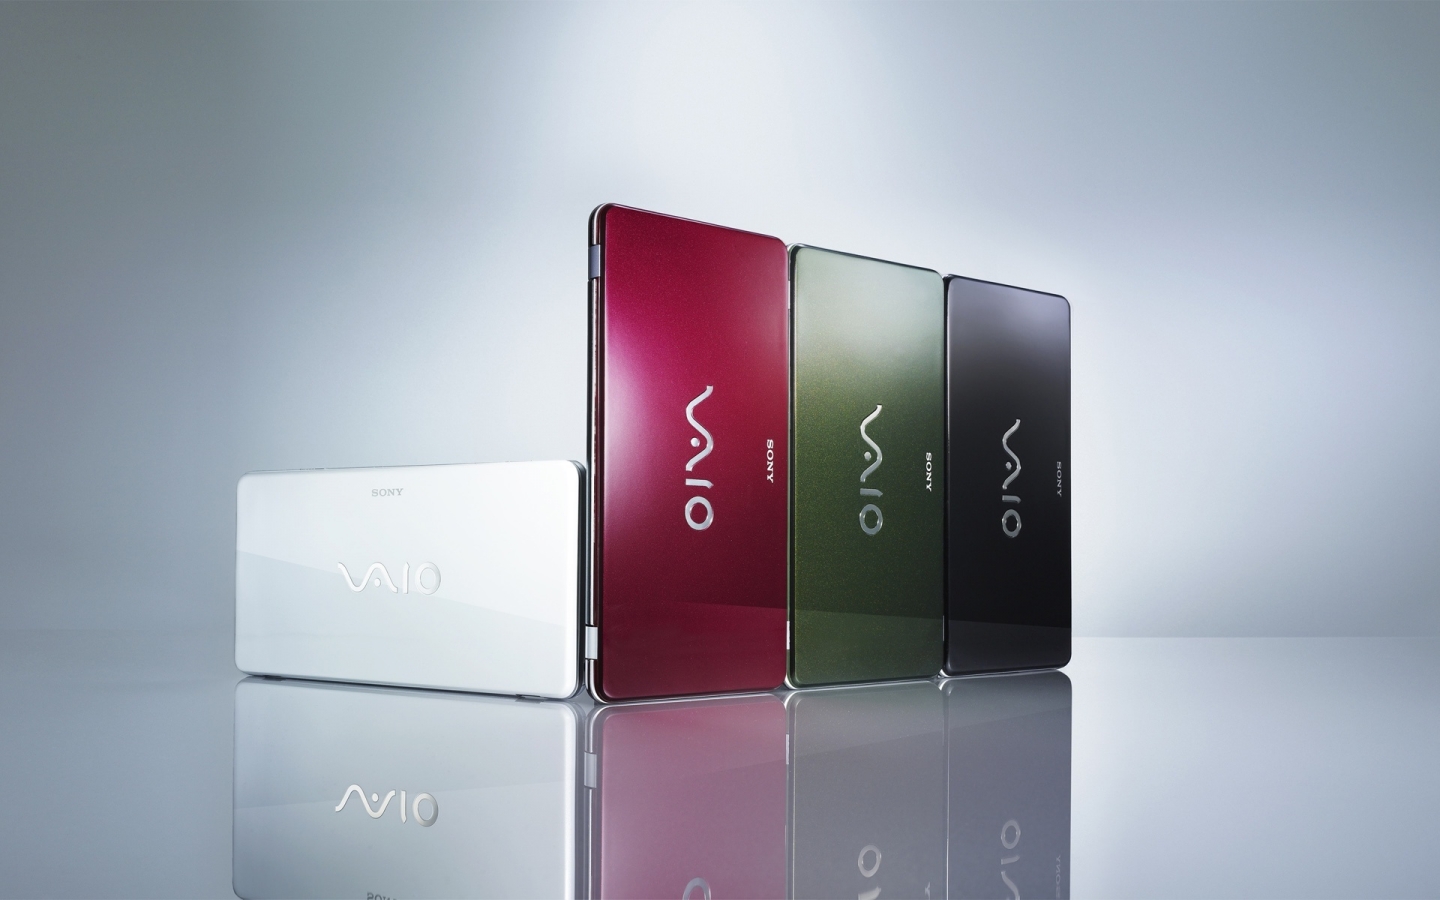 Sony Vaio 4 colors for 1440 x 900 widescreen resolution